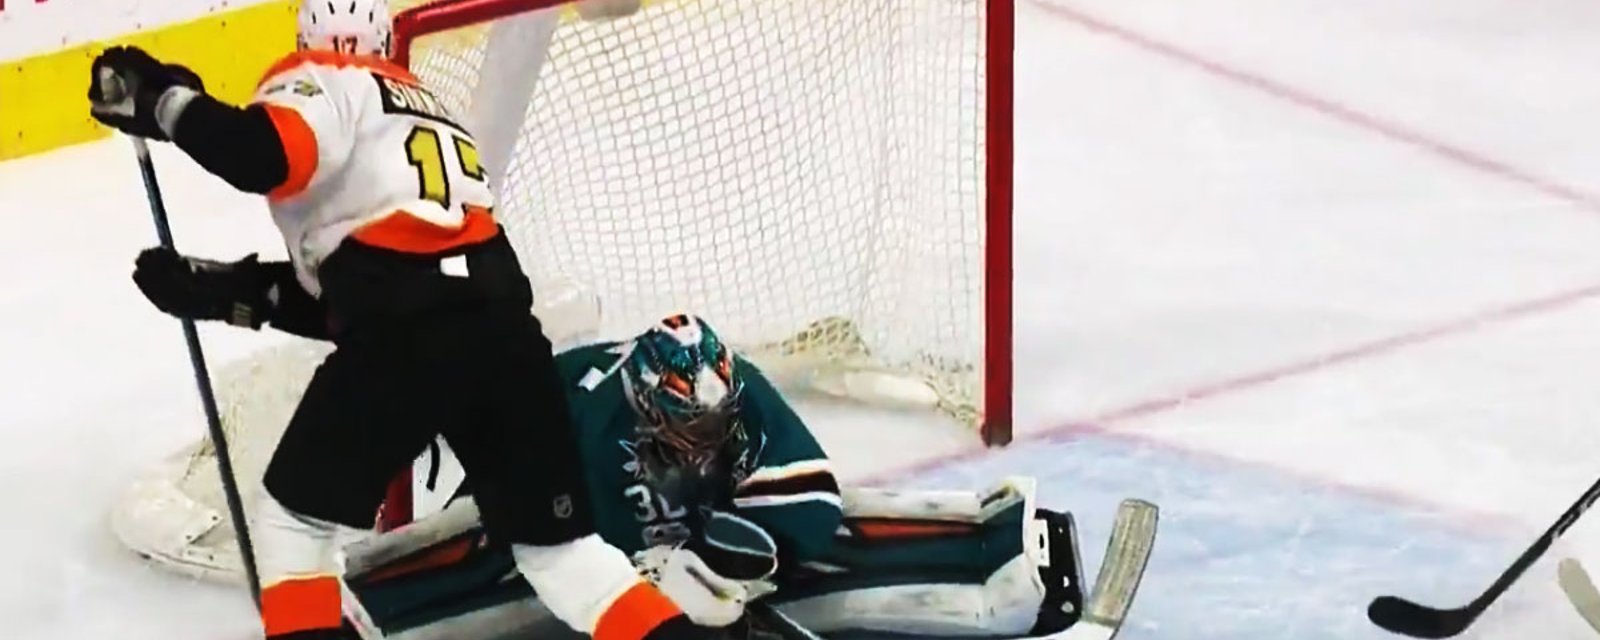 Dell robs Wayne Simmonds with ridiculous glove save!